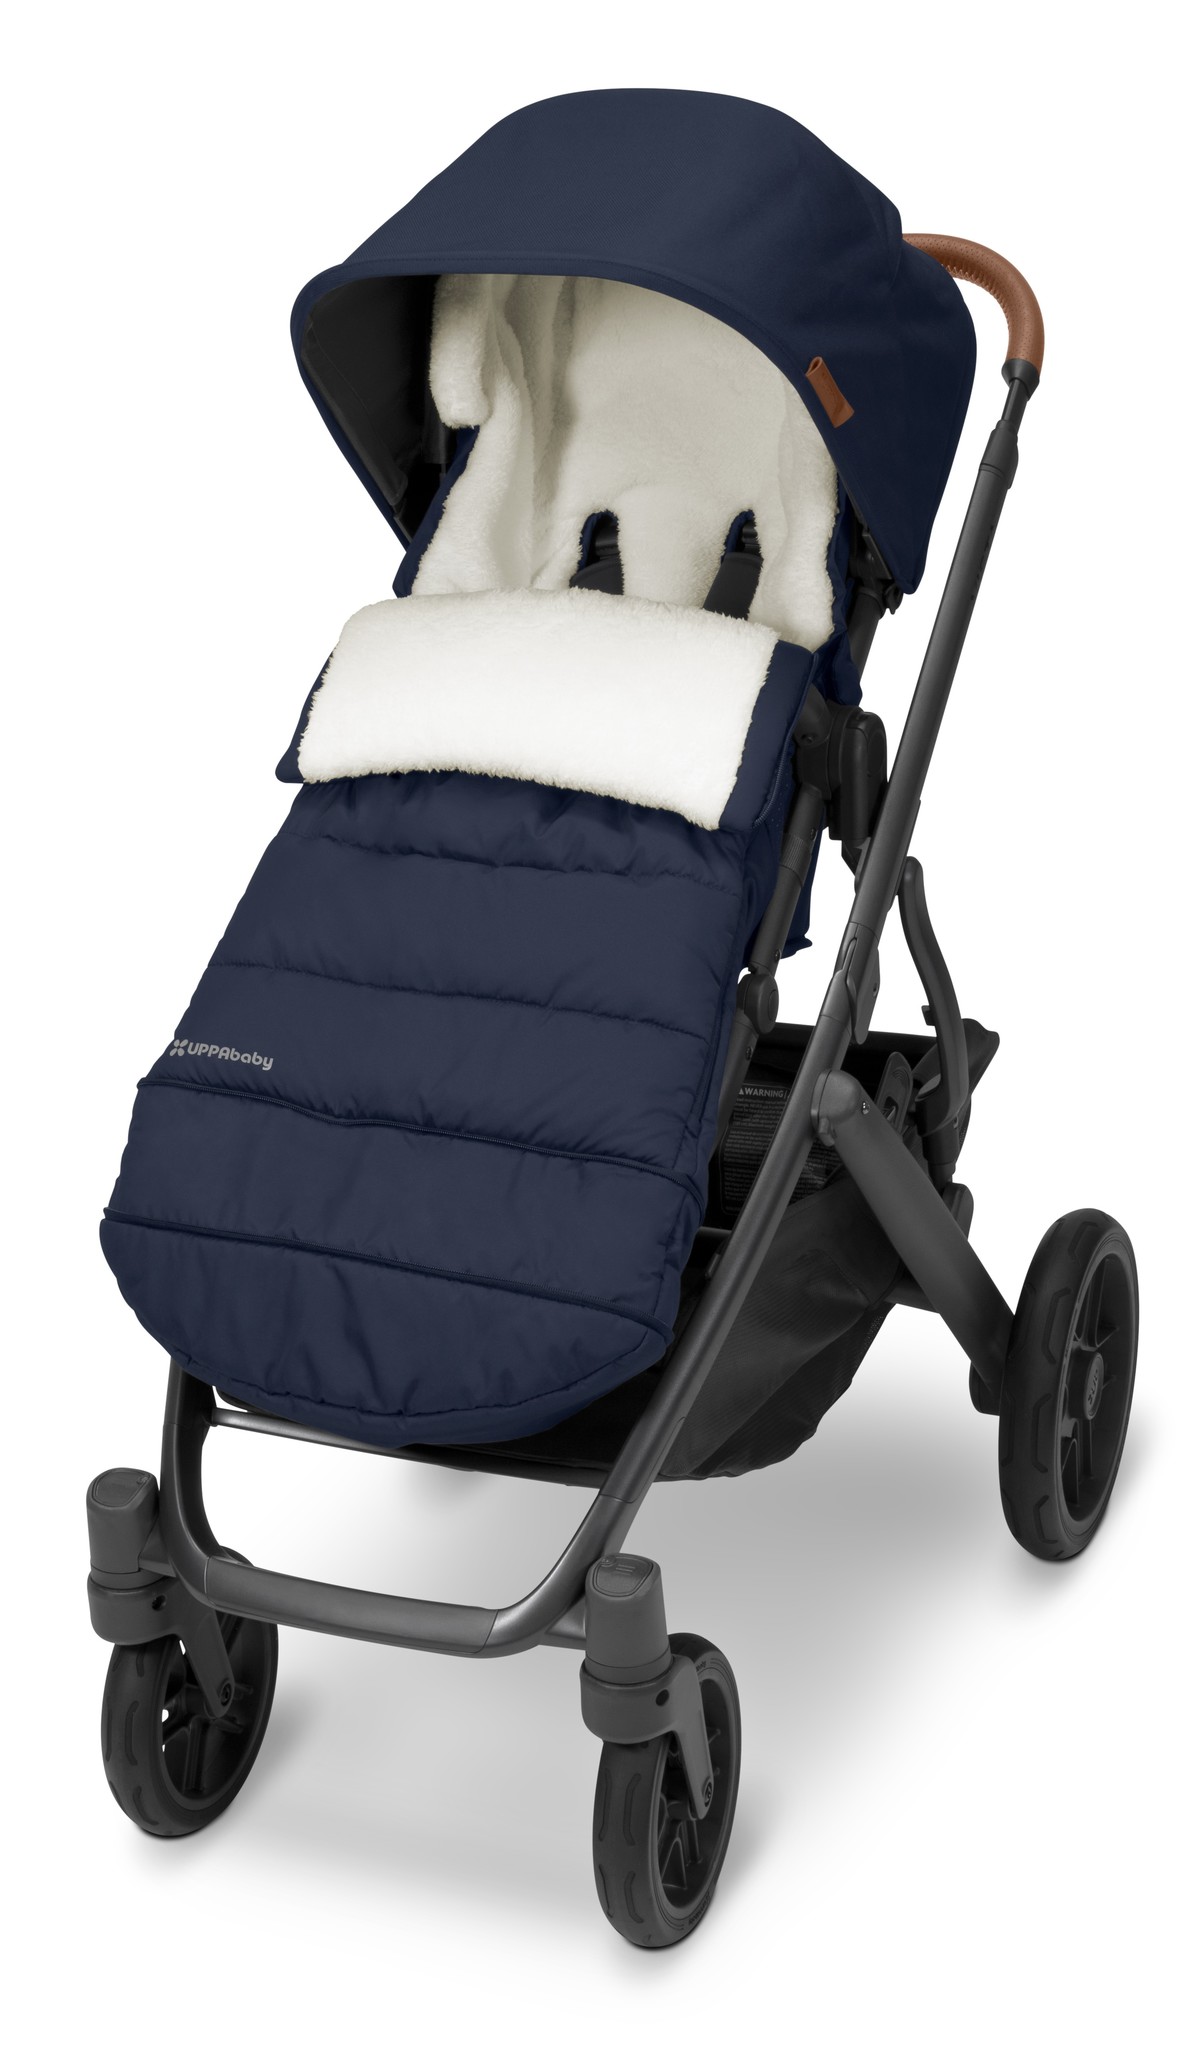 https://cdn.shoplightspeed.com/shops/605079/files/47600552/uppababy-uppababy-chanceliere-pour-poussette.jpg